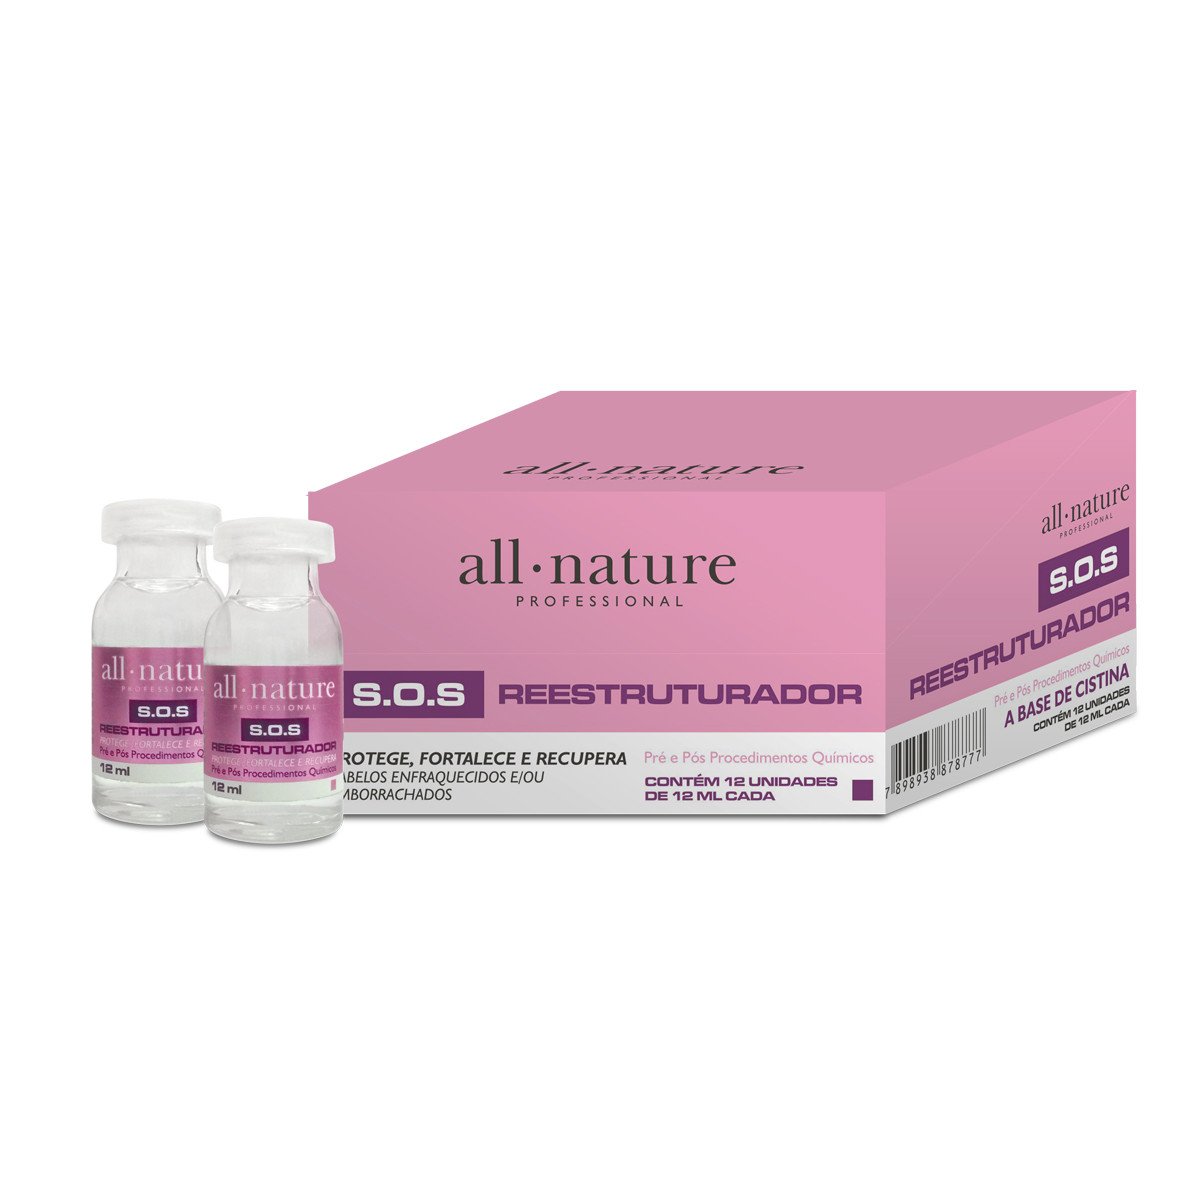 All Nature Home Care Cystine SOS Restructurer Protection Strengthening Recovery 12x12ml - All Nature